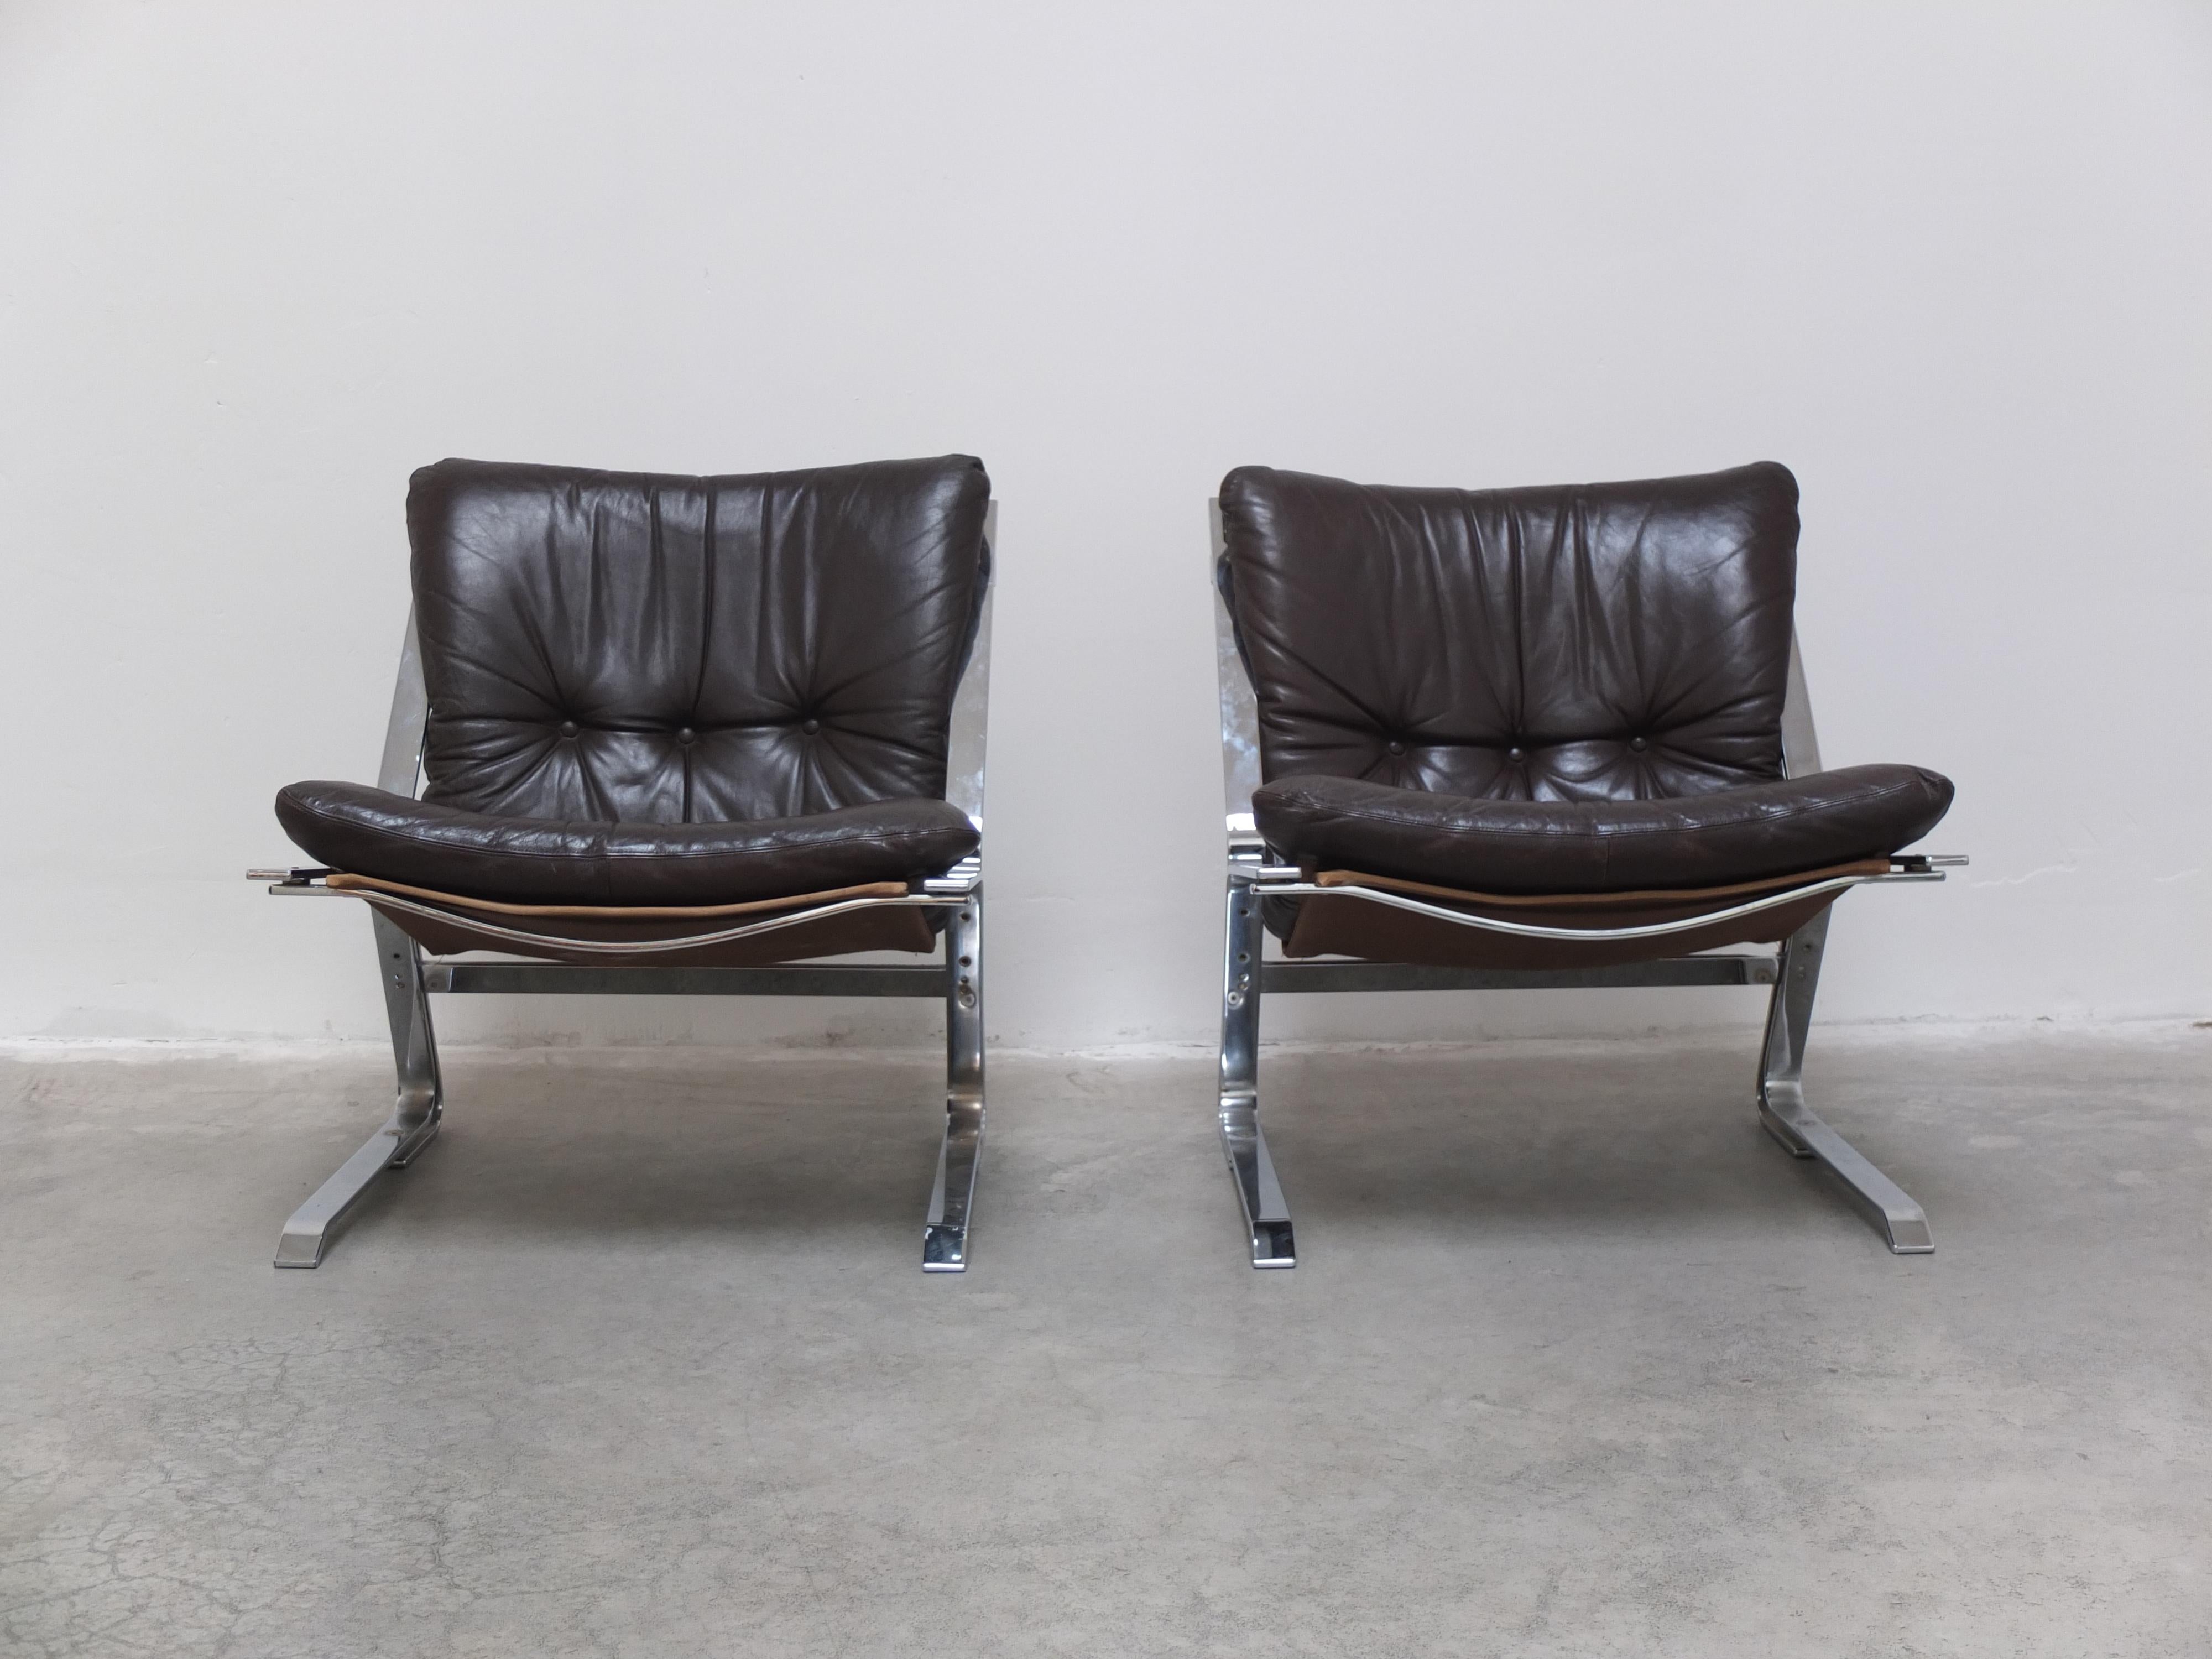 Magnificent pair of easy chairs designed by Elsa & Nordahl Solheim for Rybo Rykken and Co. in Norway during the 1960s. A very interesting design with frames made of chromed flat steel combined with the original and very soft dark brown leather